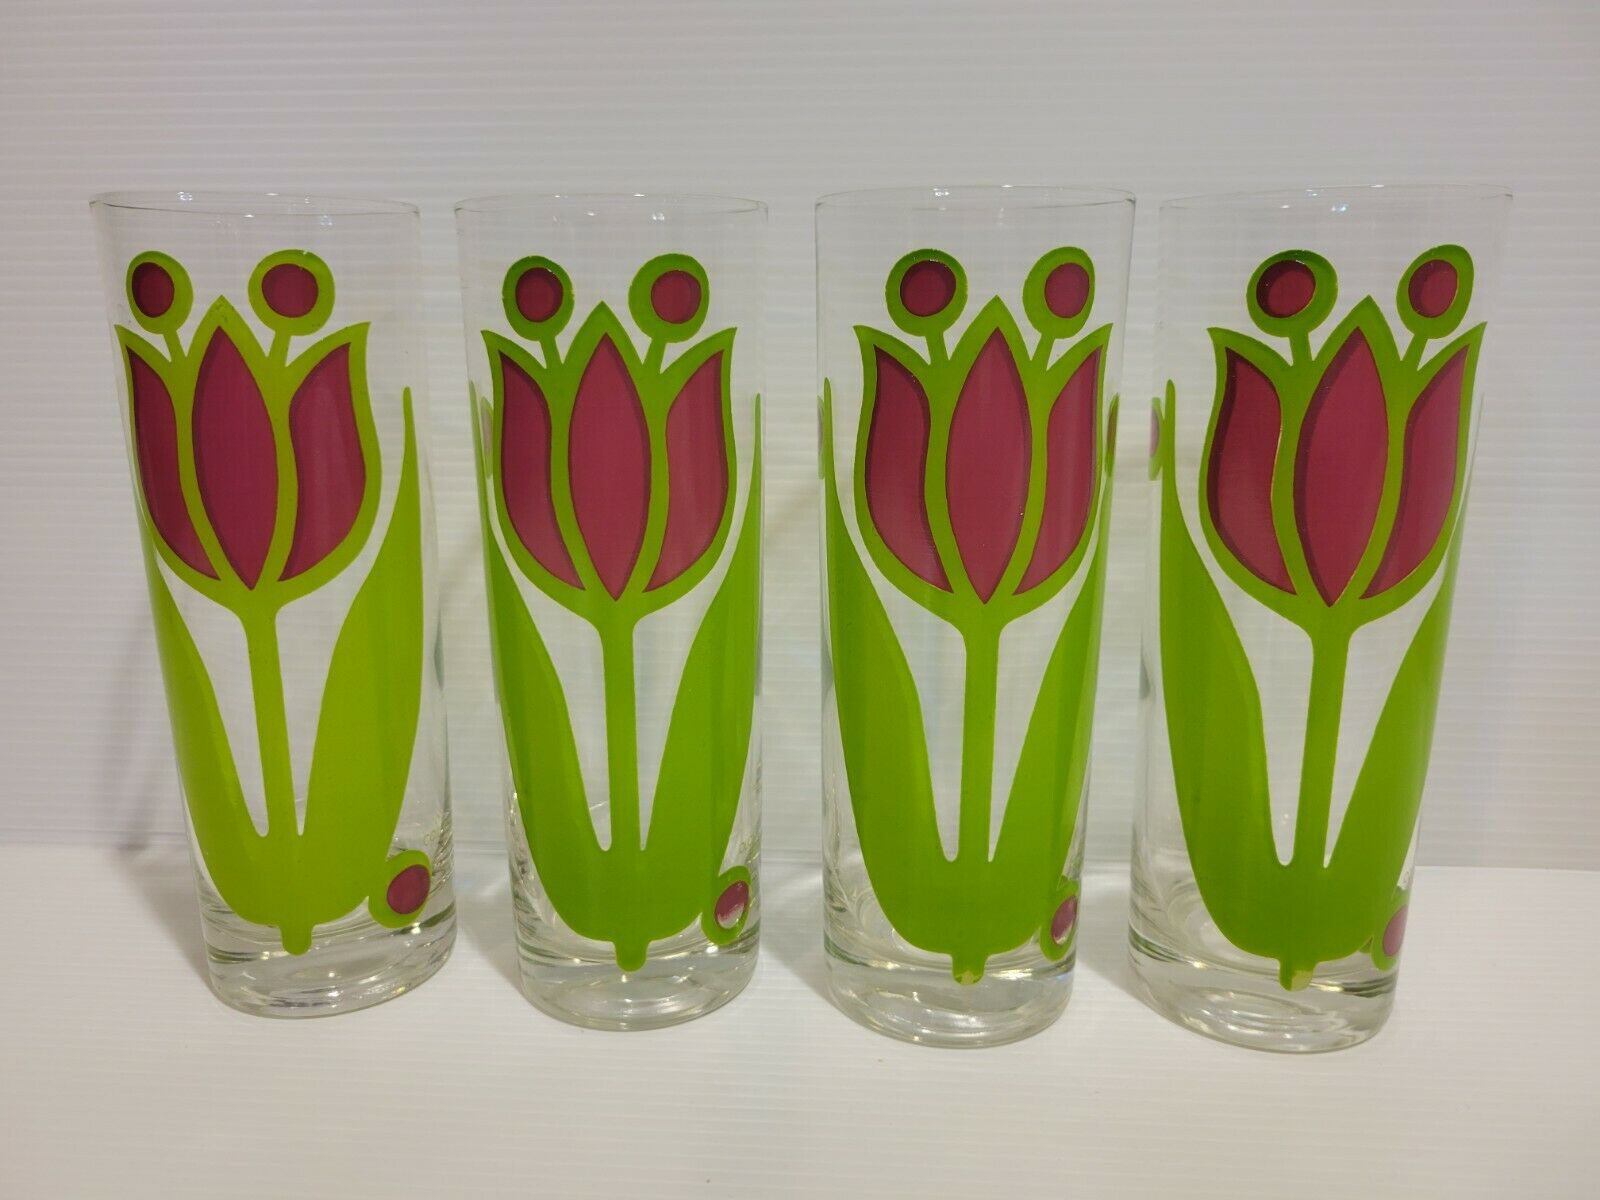 Vintage 4pc COLONY TULIP PINK AND GREEN TUMBLERS GLASSES  RETRO